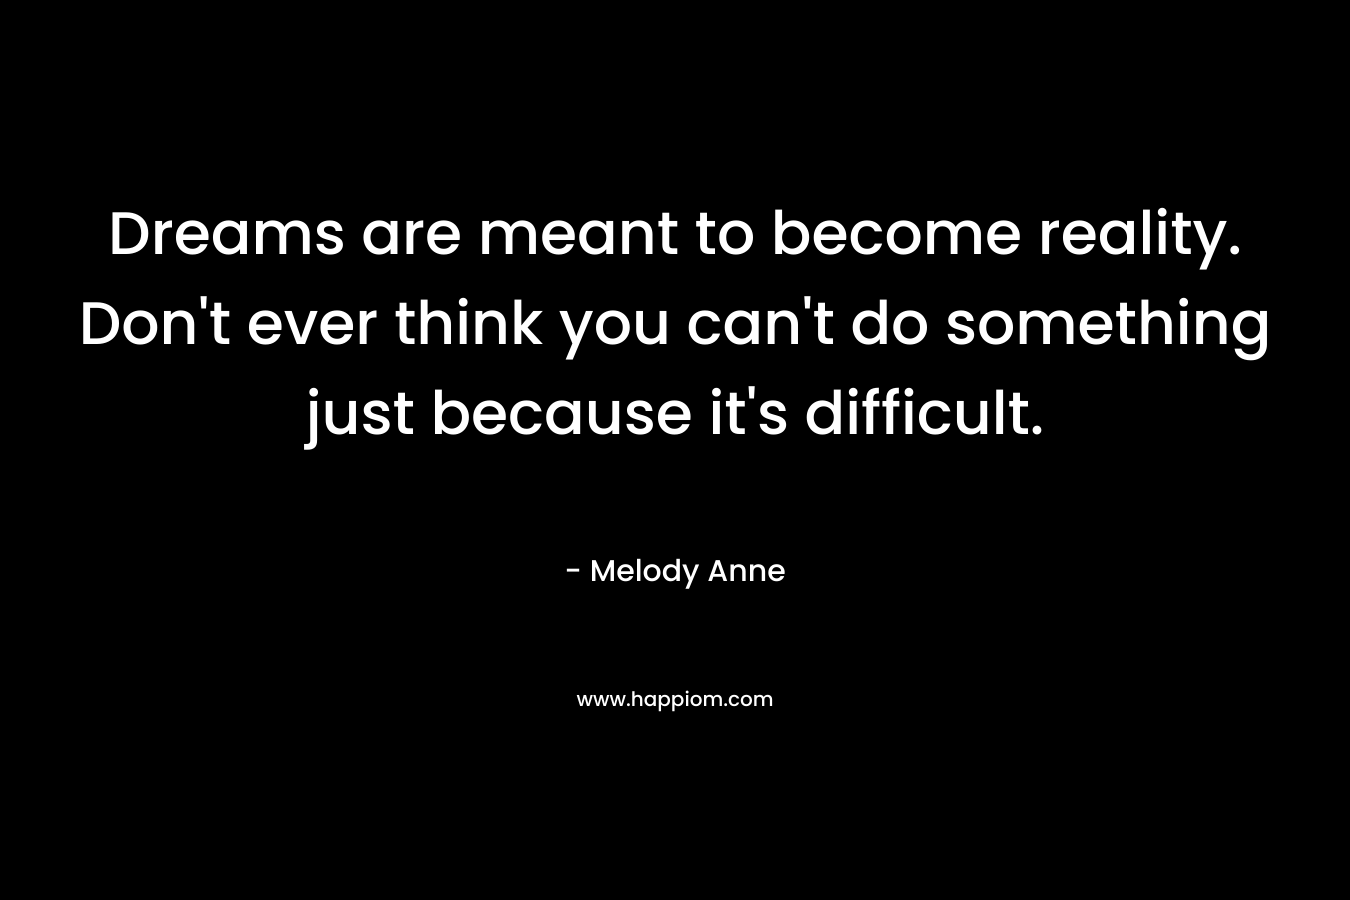 Dreams are meant to become reality. Don't ever think you can't do something just because it's difficult.